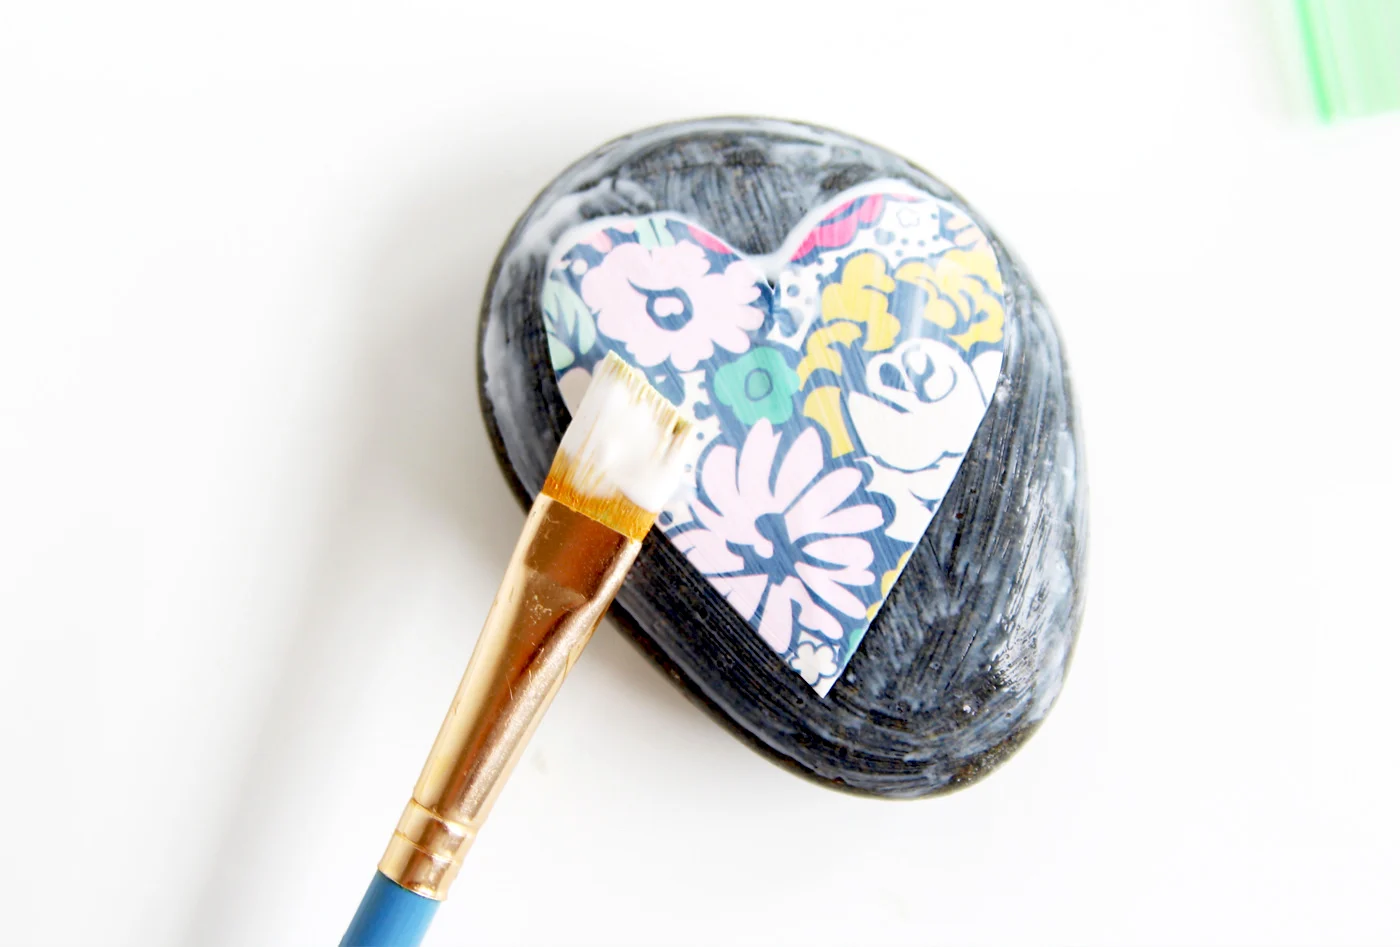 Applying the paper heart shape to the rock and brushing over the top with Mod Podge